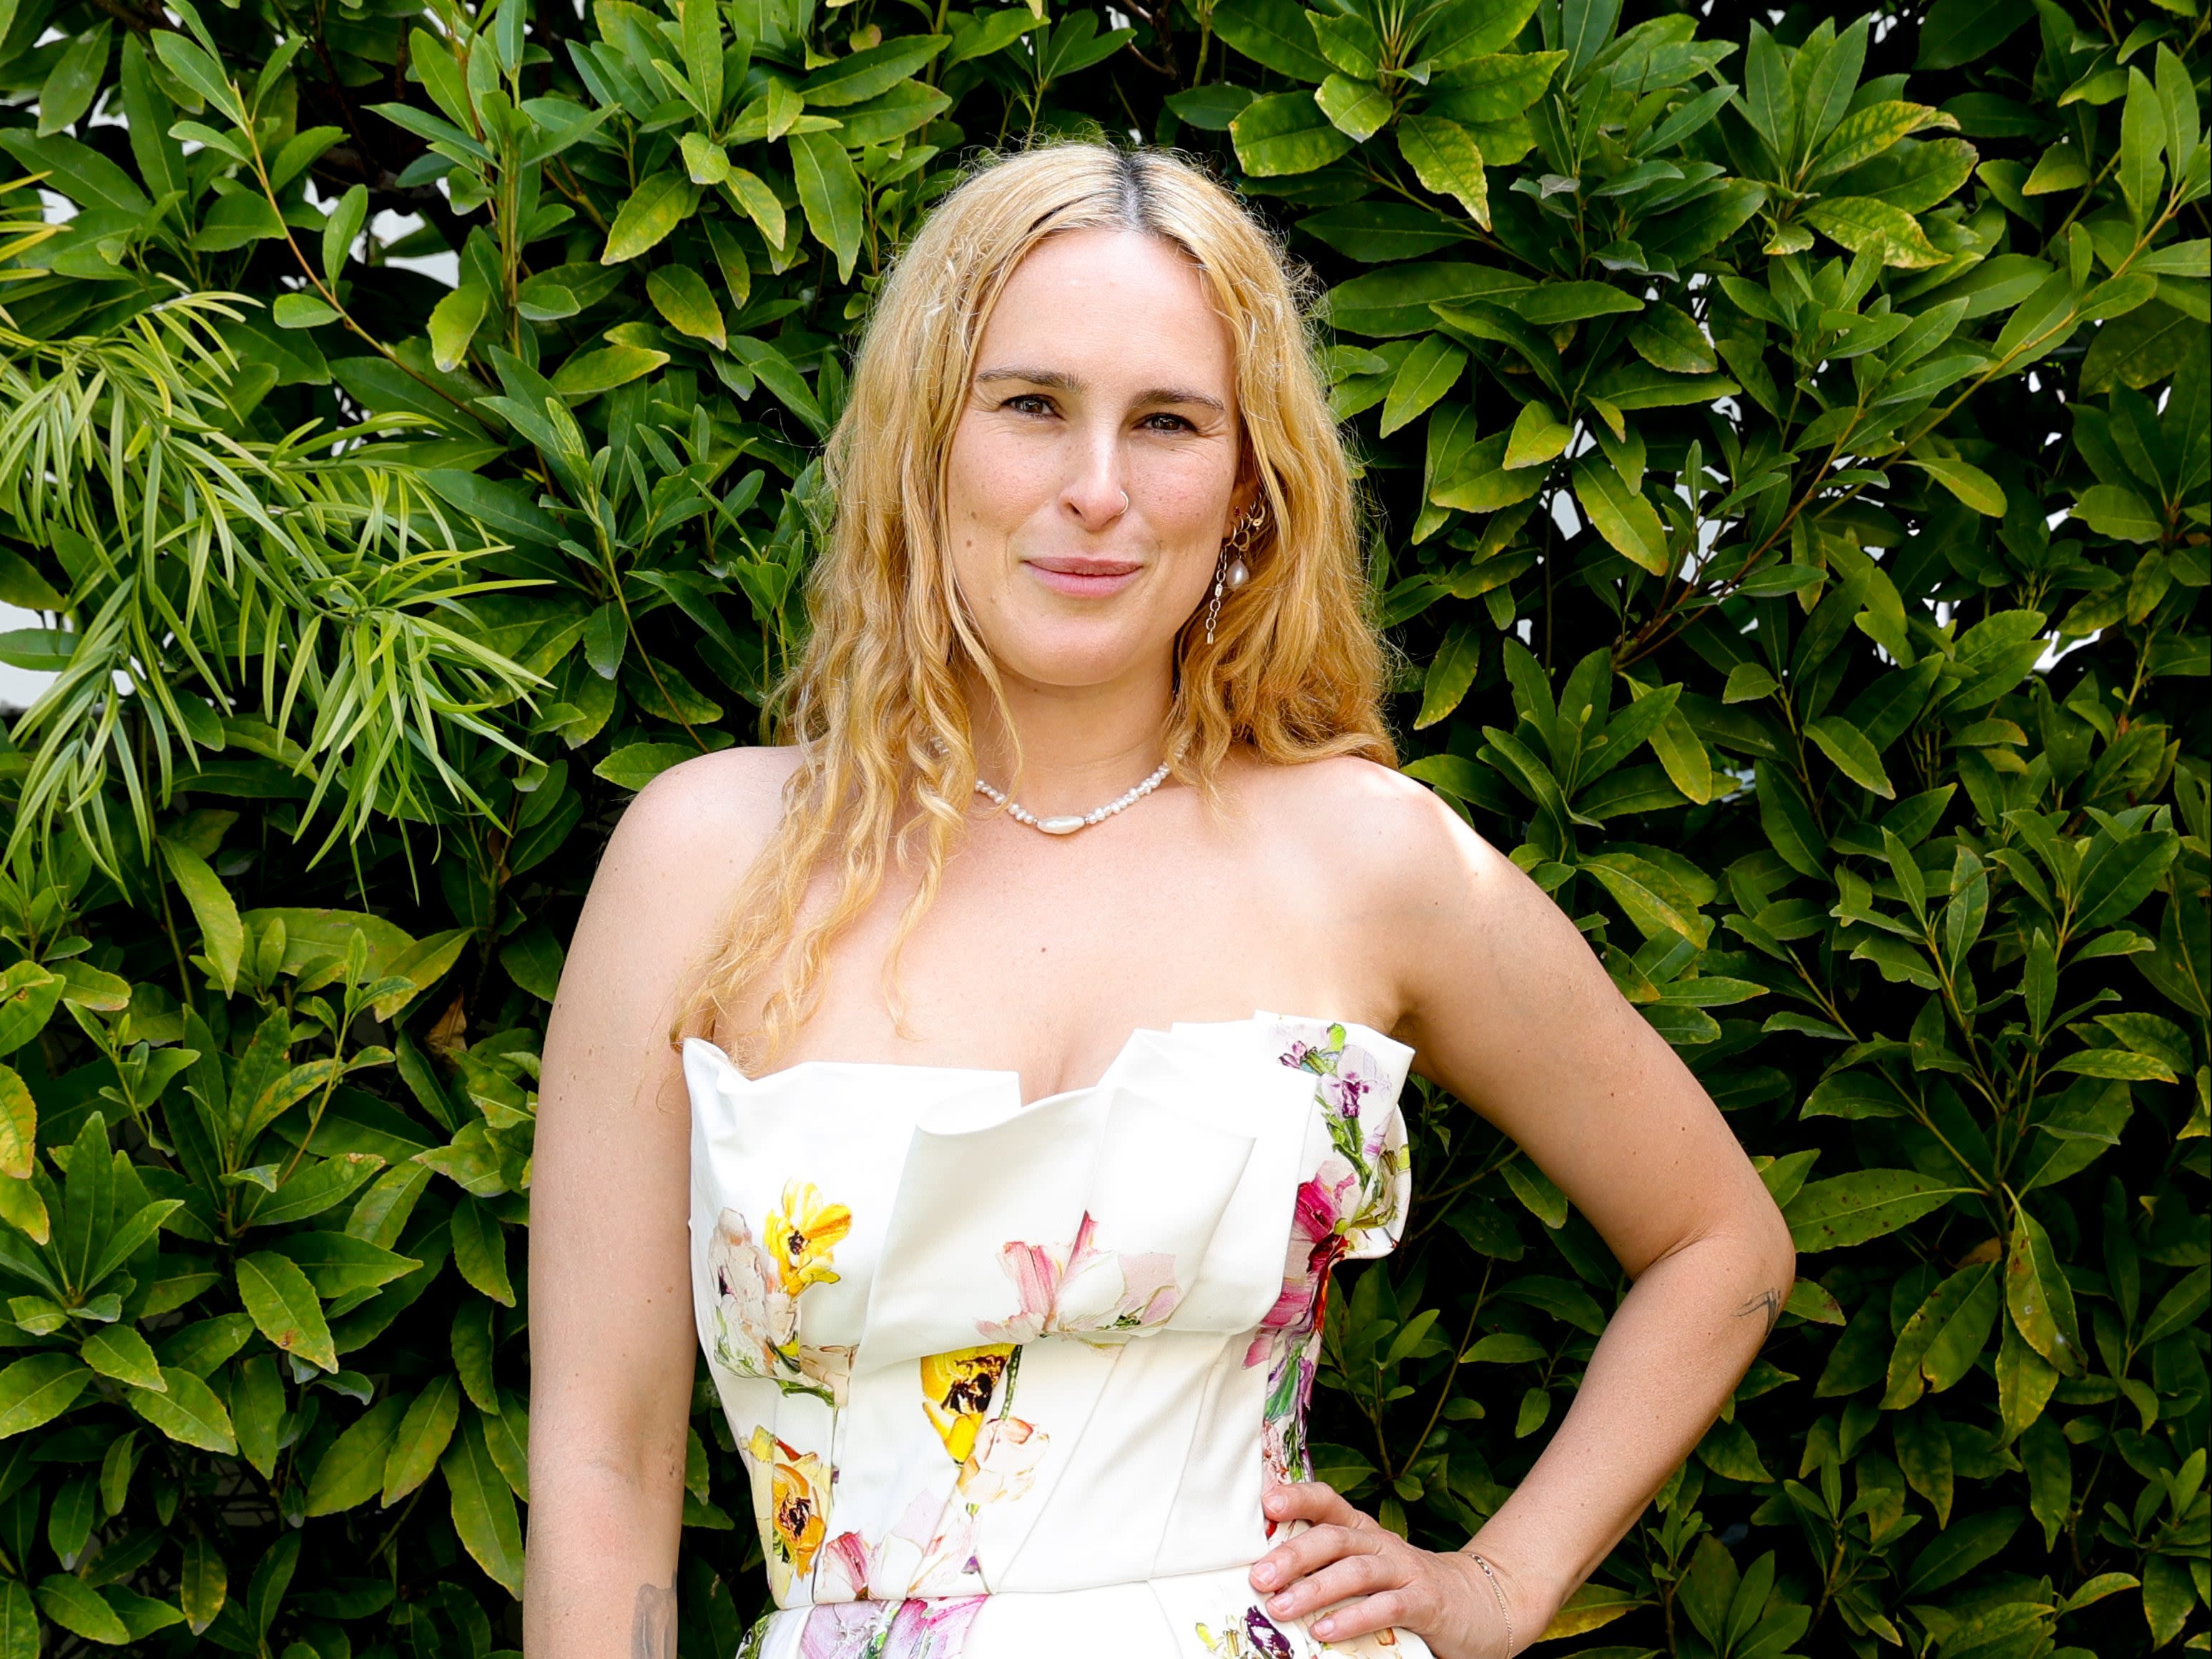 Rumer Willis Is Embracing the ‘Most Authentic, Juiciest Version’ of Herself One Year Postpartum